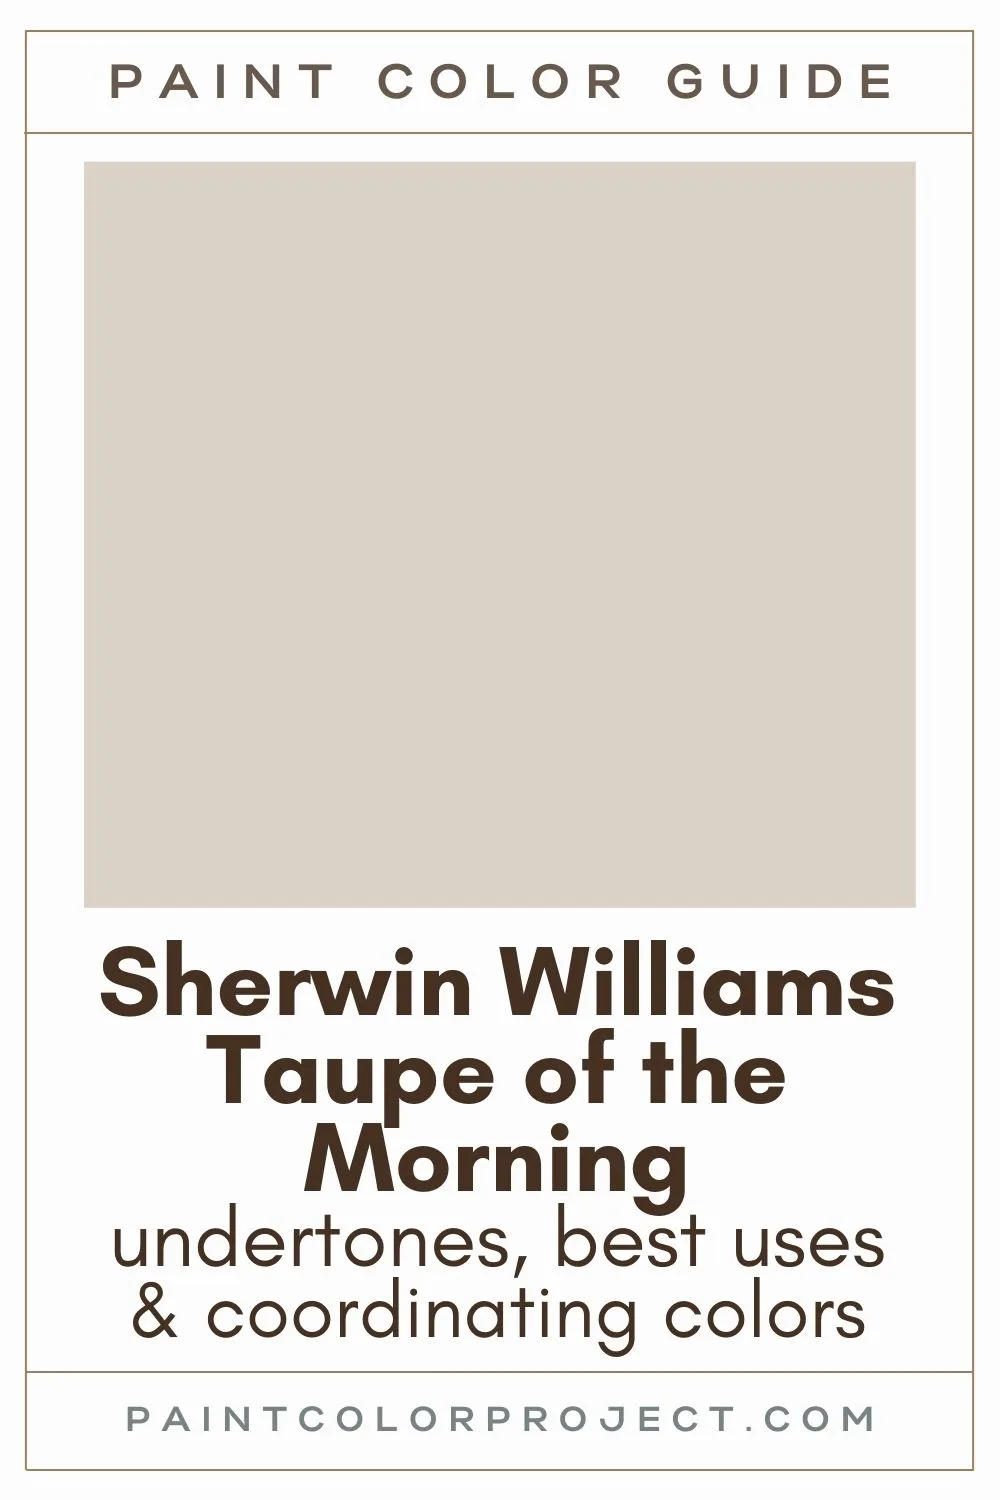 Sherwin Williams Taupe of the Morning Paint Color Guide.